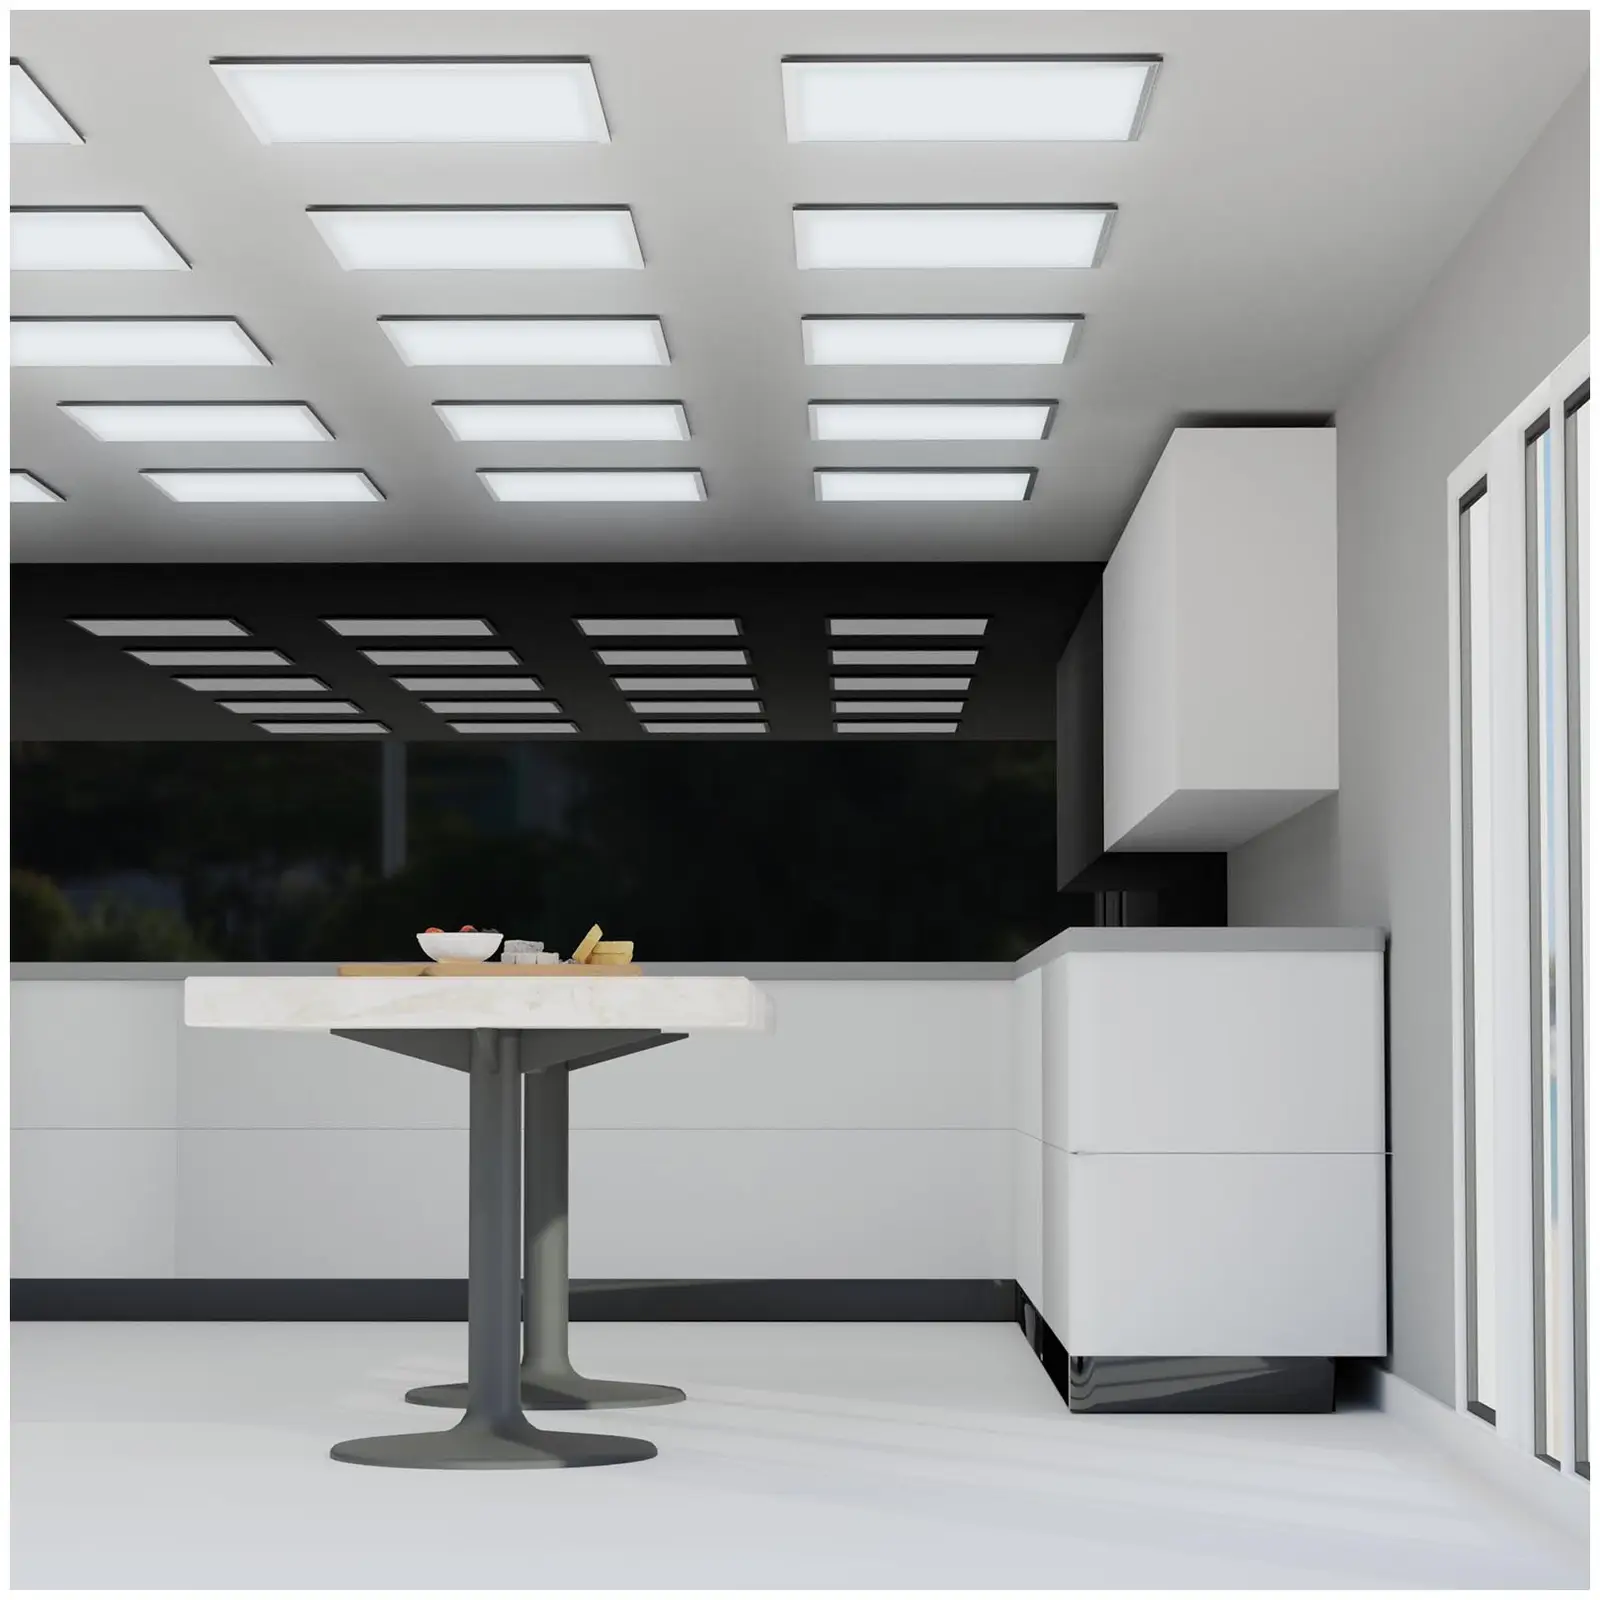 Factory second LED Ceiling Panel - 62 x 62 cm - 48 W - 4,560 lm - 5,700 K